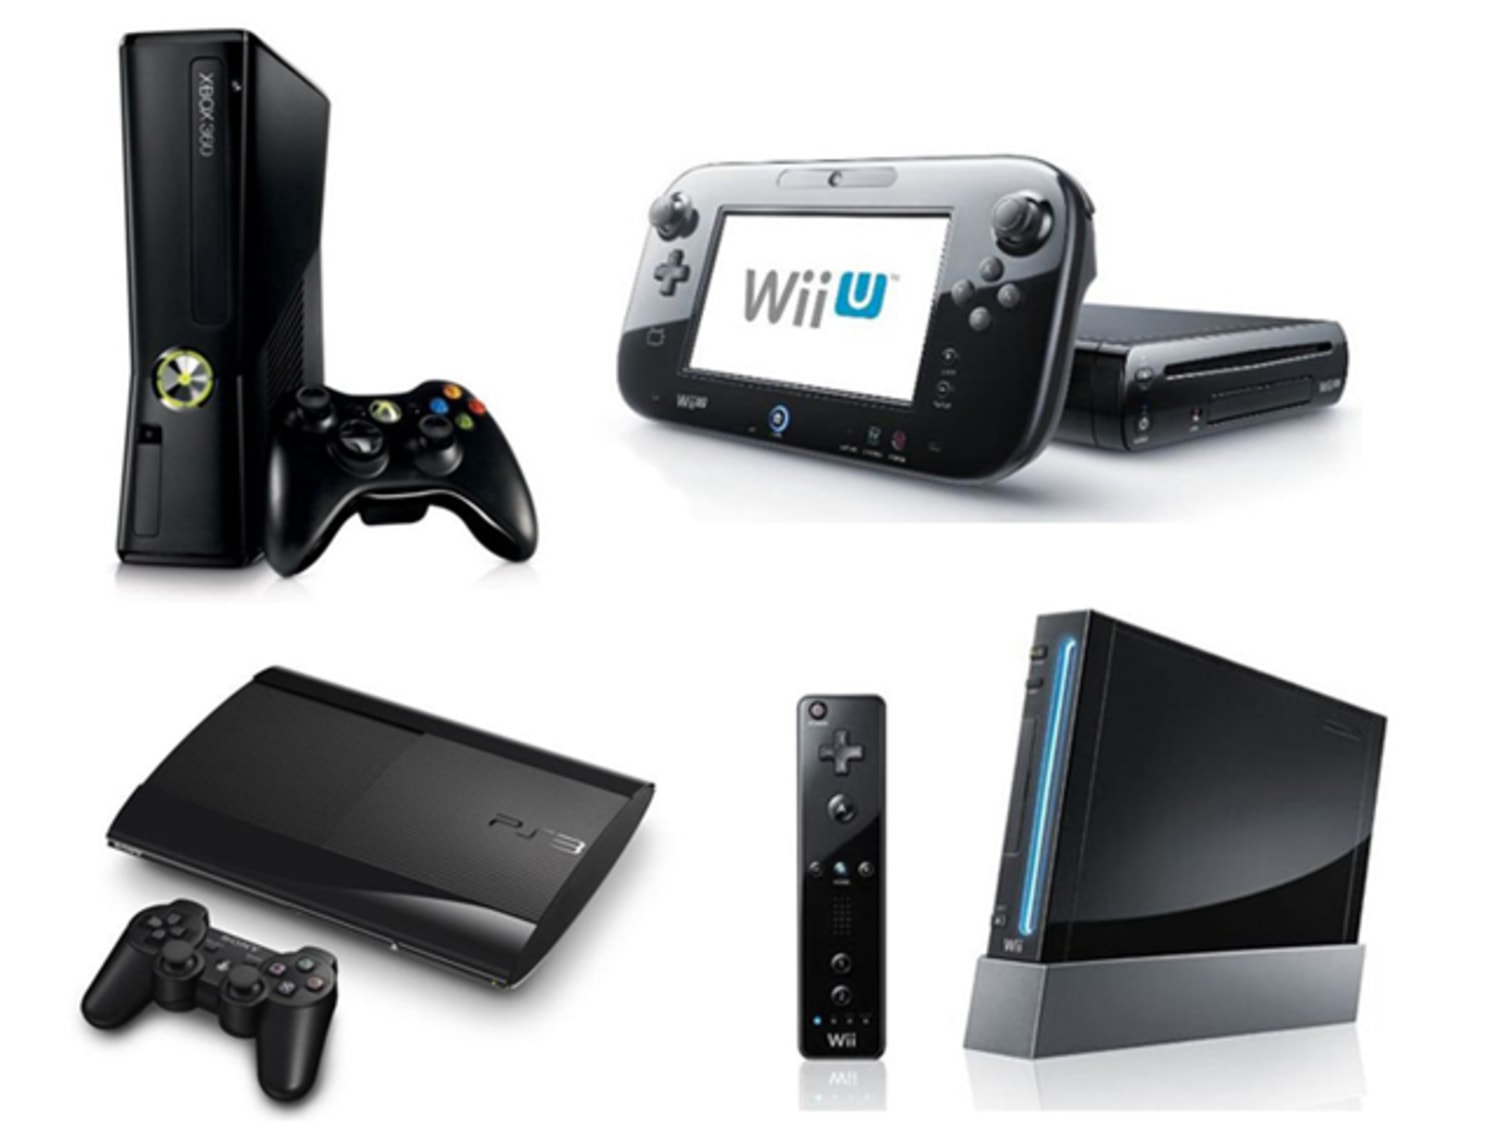 gezagvoerder calorie eiland Wii U, Xbox 360, PlayStation 3: Which game machine should you give?